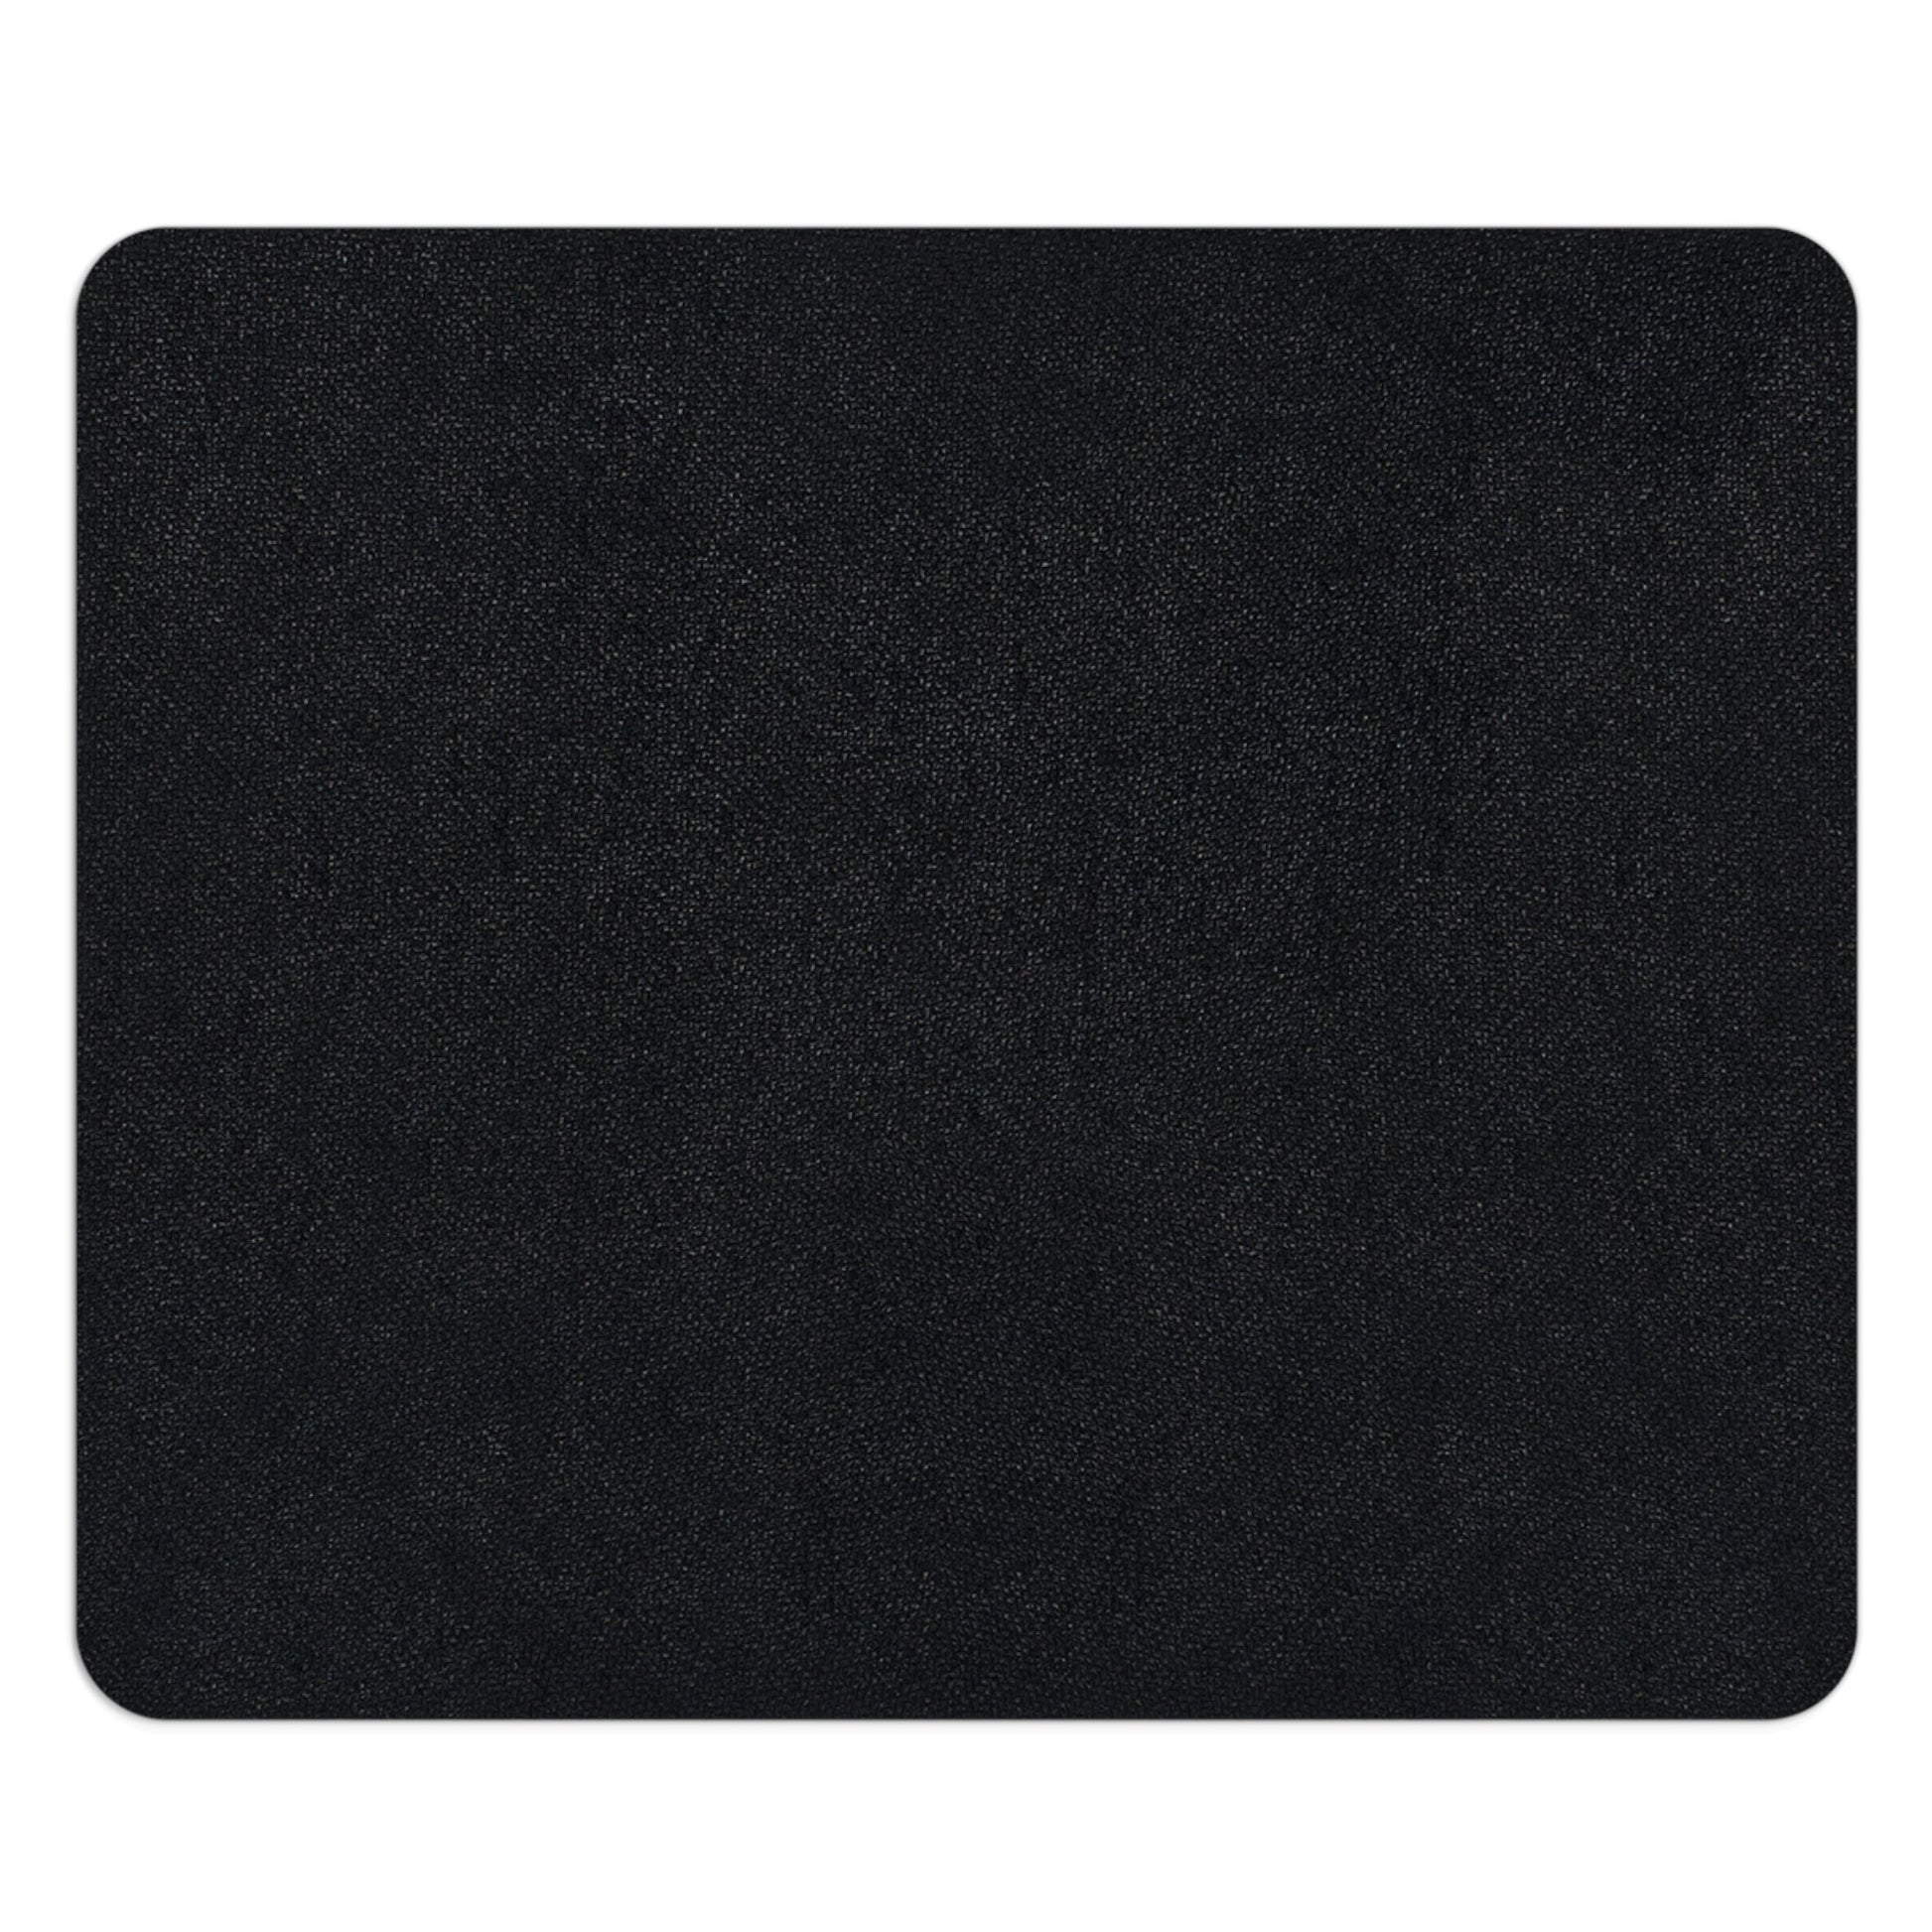 the backside neoprene side of a cannabis mouse pad.